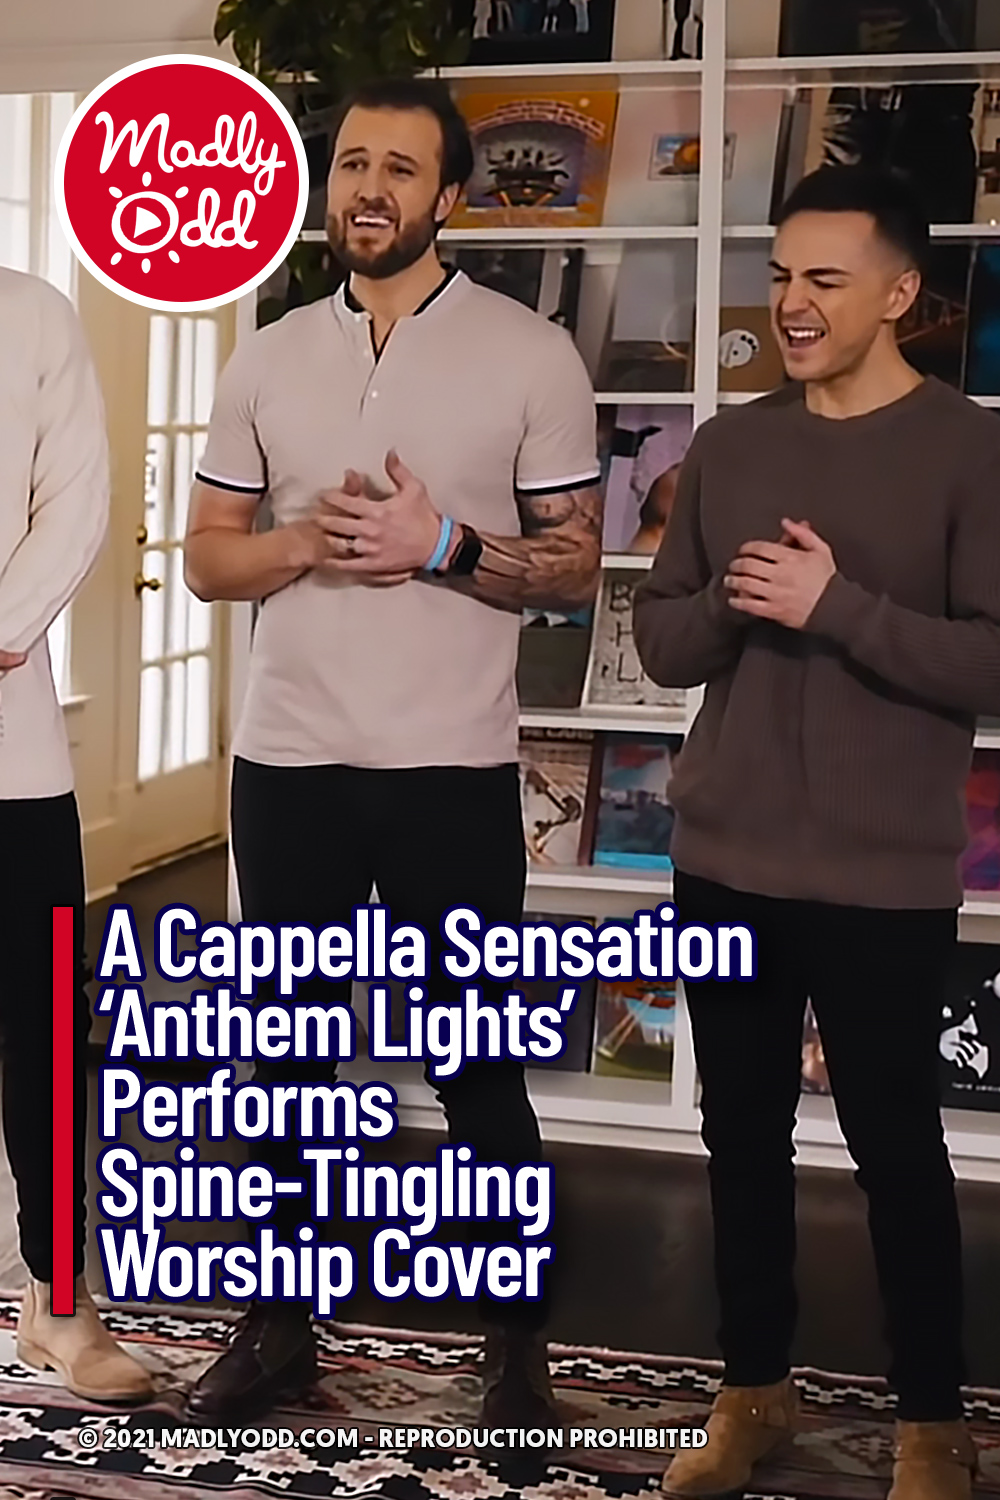 A Cappella Sensation ‘Anthem Lights’ Performs Spine-Tingling Worship Cover